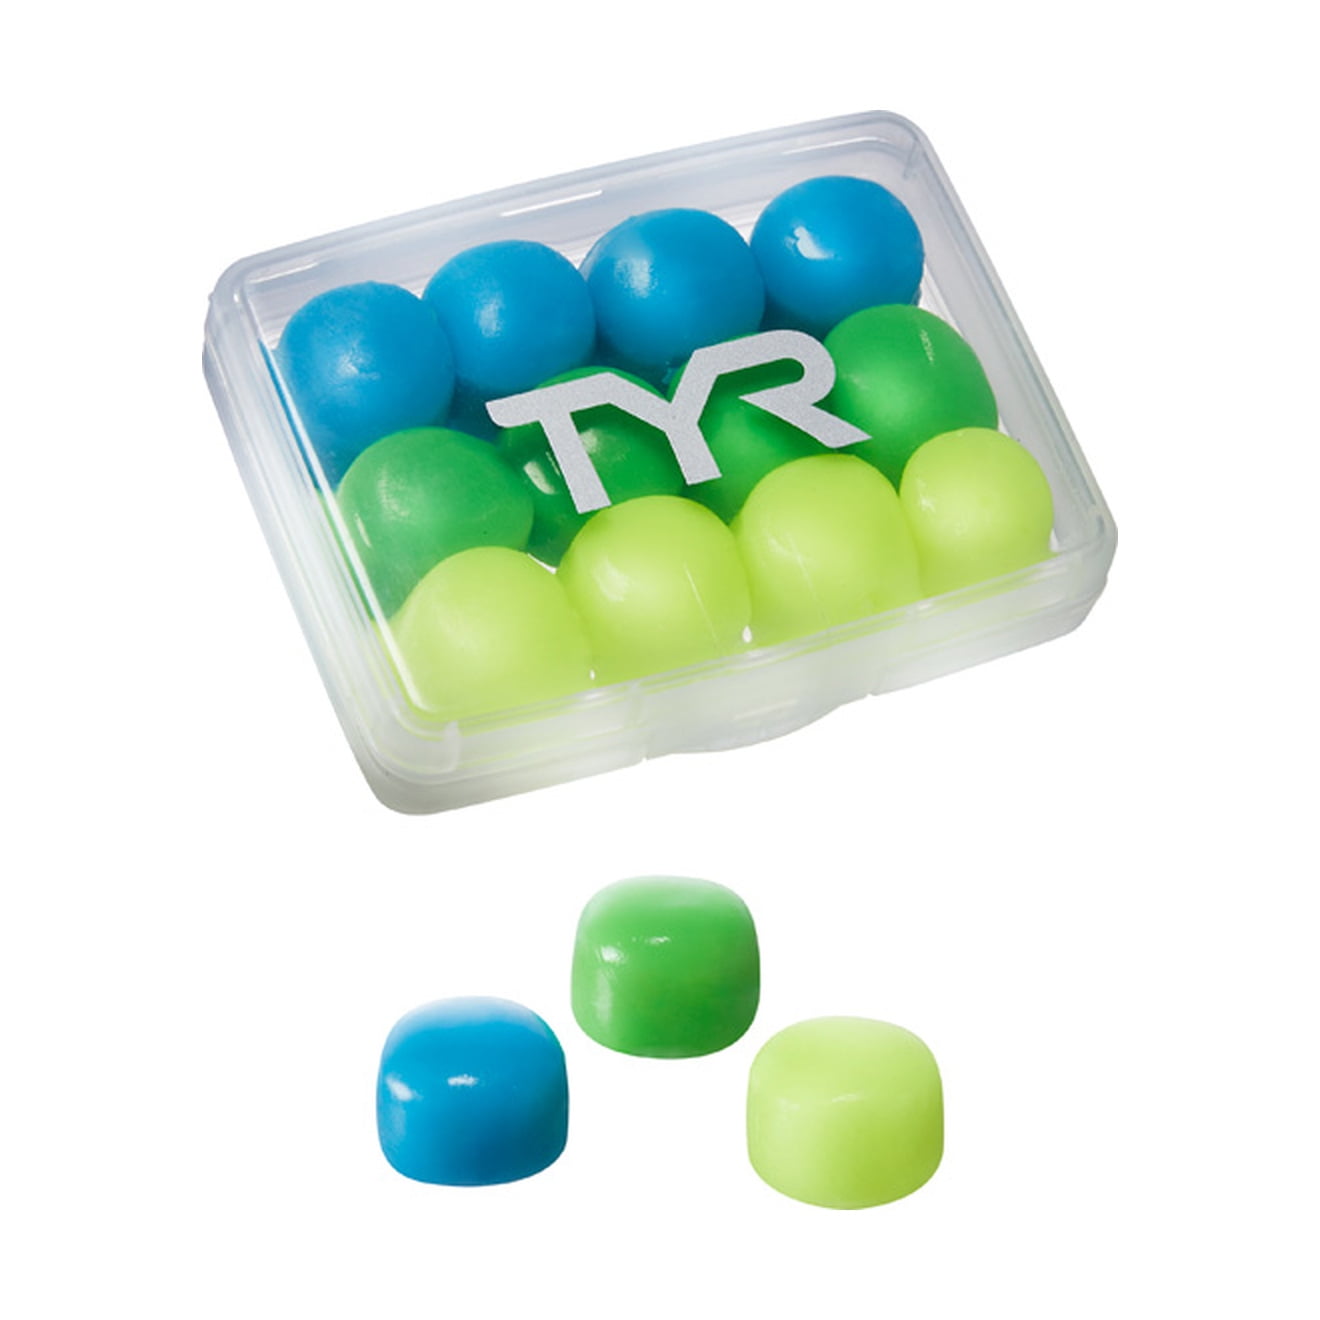 TYR Kids' Soft Silicone Ear Plugs - 12 Pack (6 Pairs)